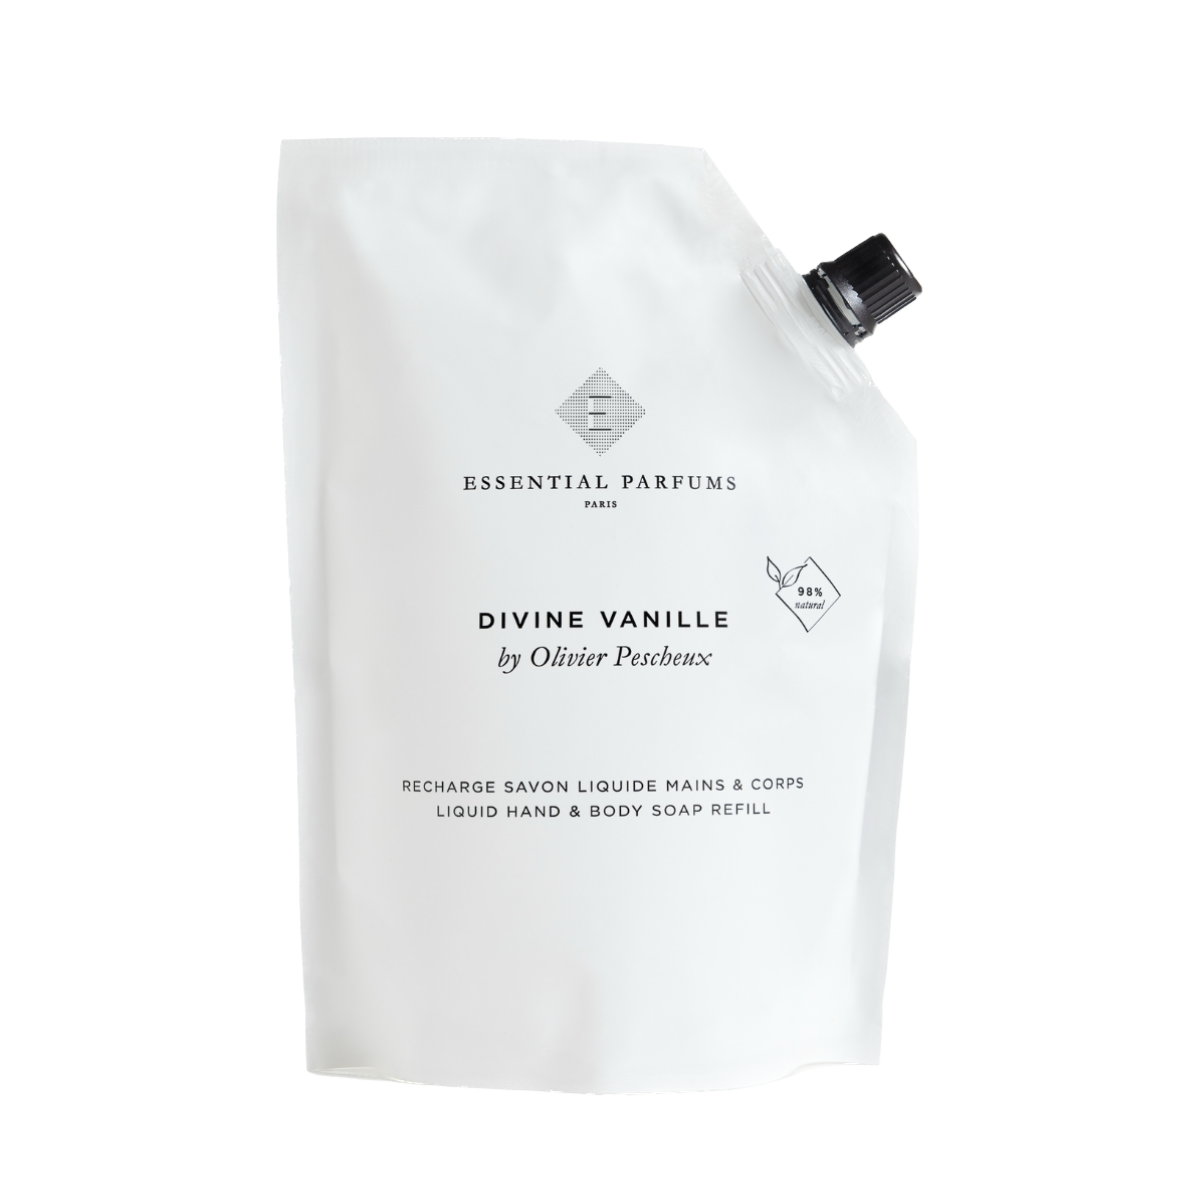 Essential Parfums Divine Vanille Hand and Body Soap Refill 500ml